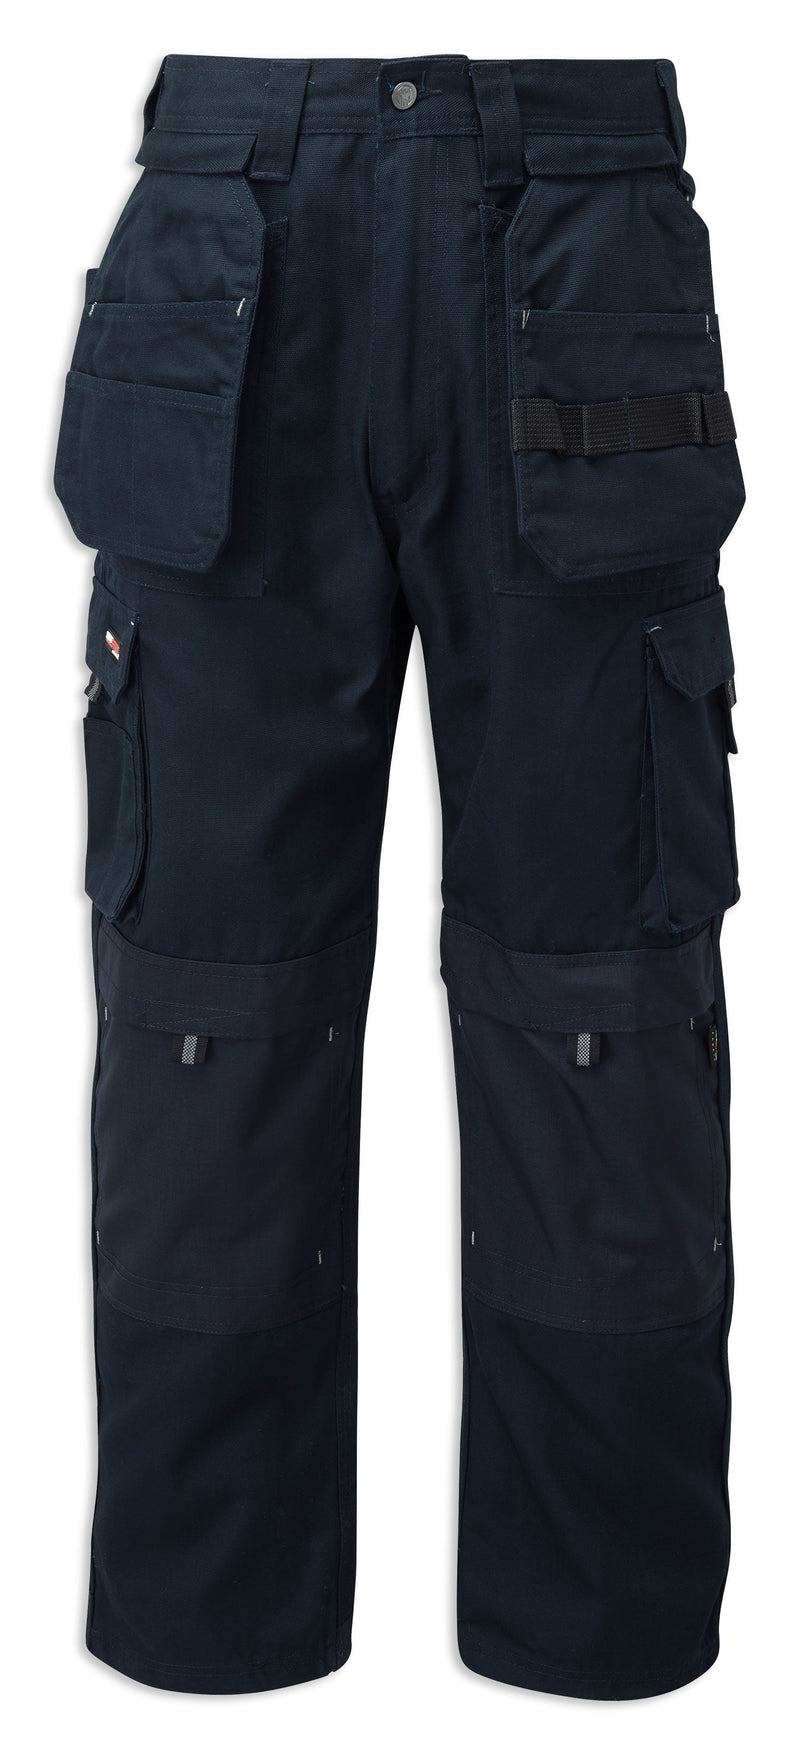 Navy Castle Tuffstuff Extreme Work Trousers